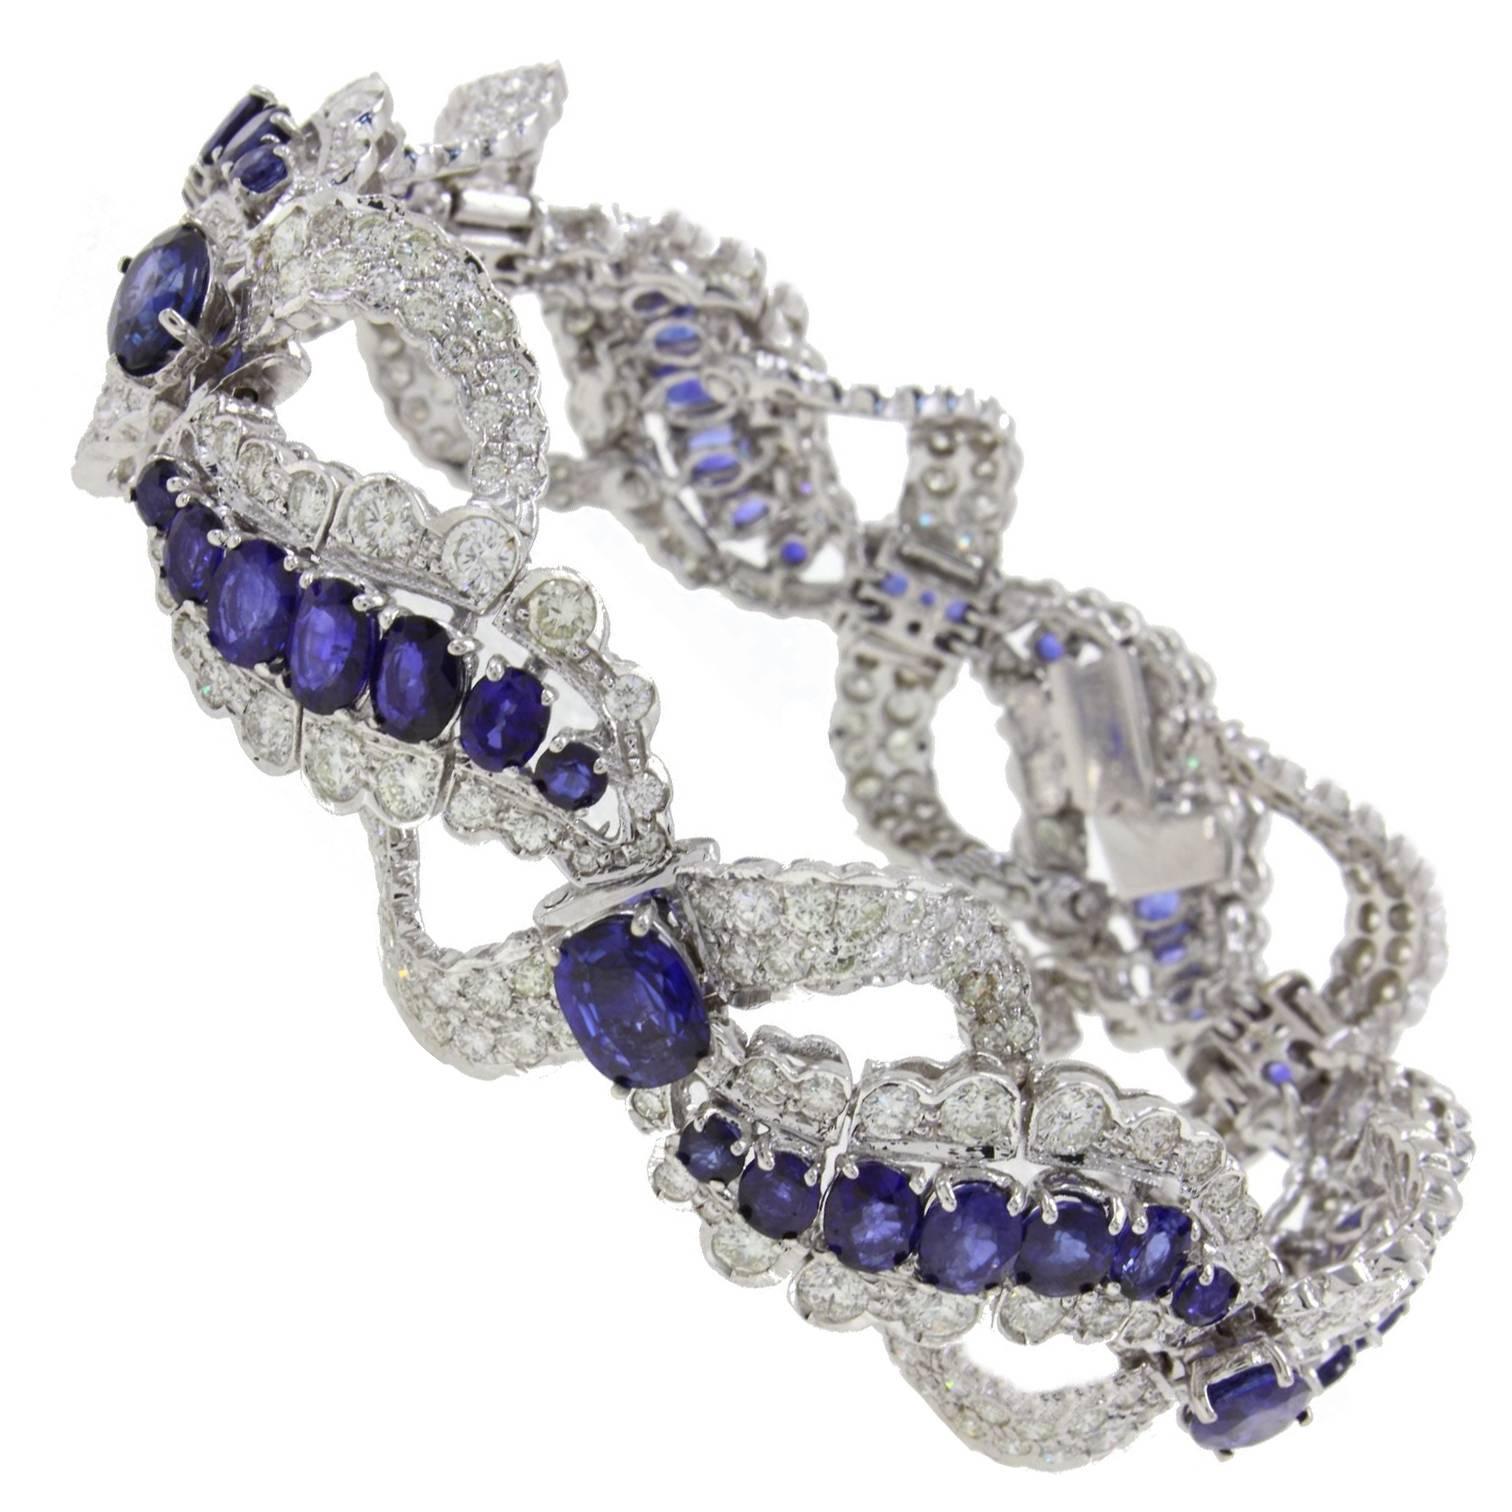 c 17, 95 Sapphire and ct 9, 85 Diamond Gold Clamper Bracelet For Sale